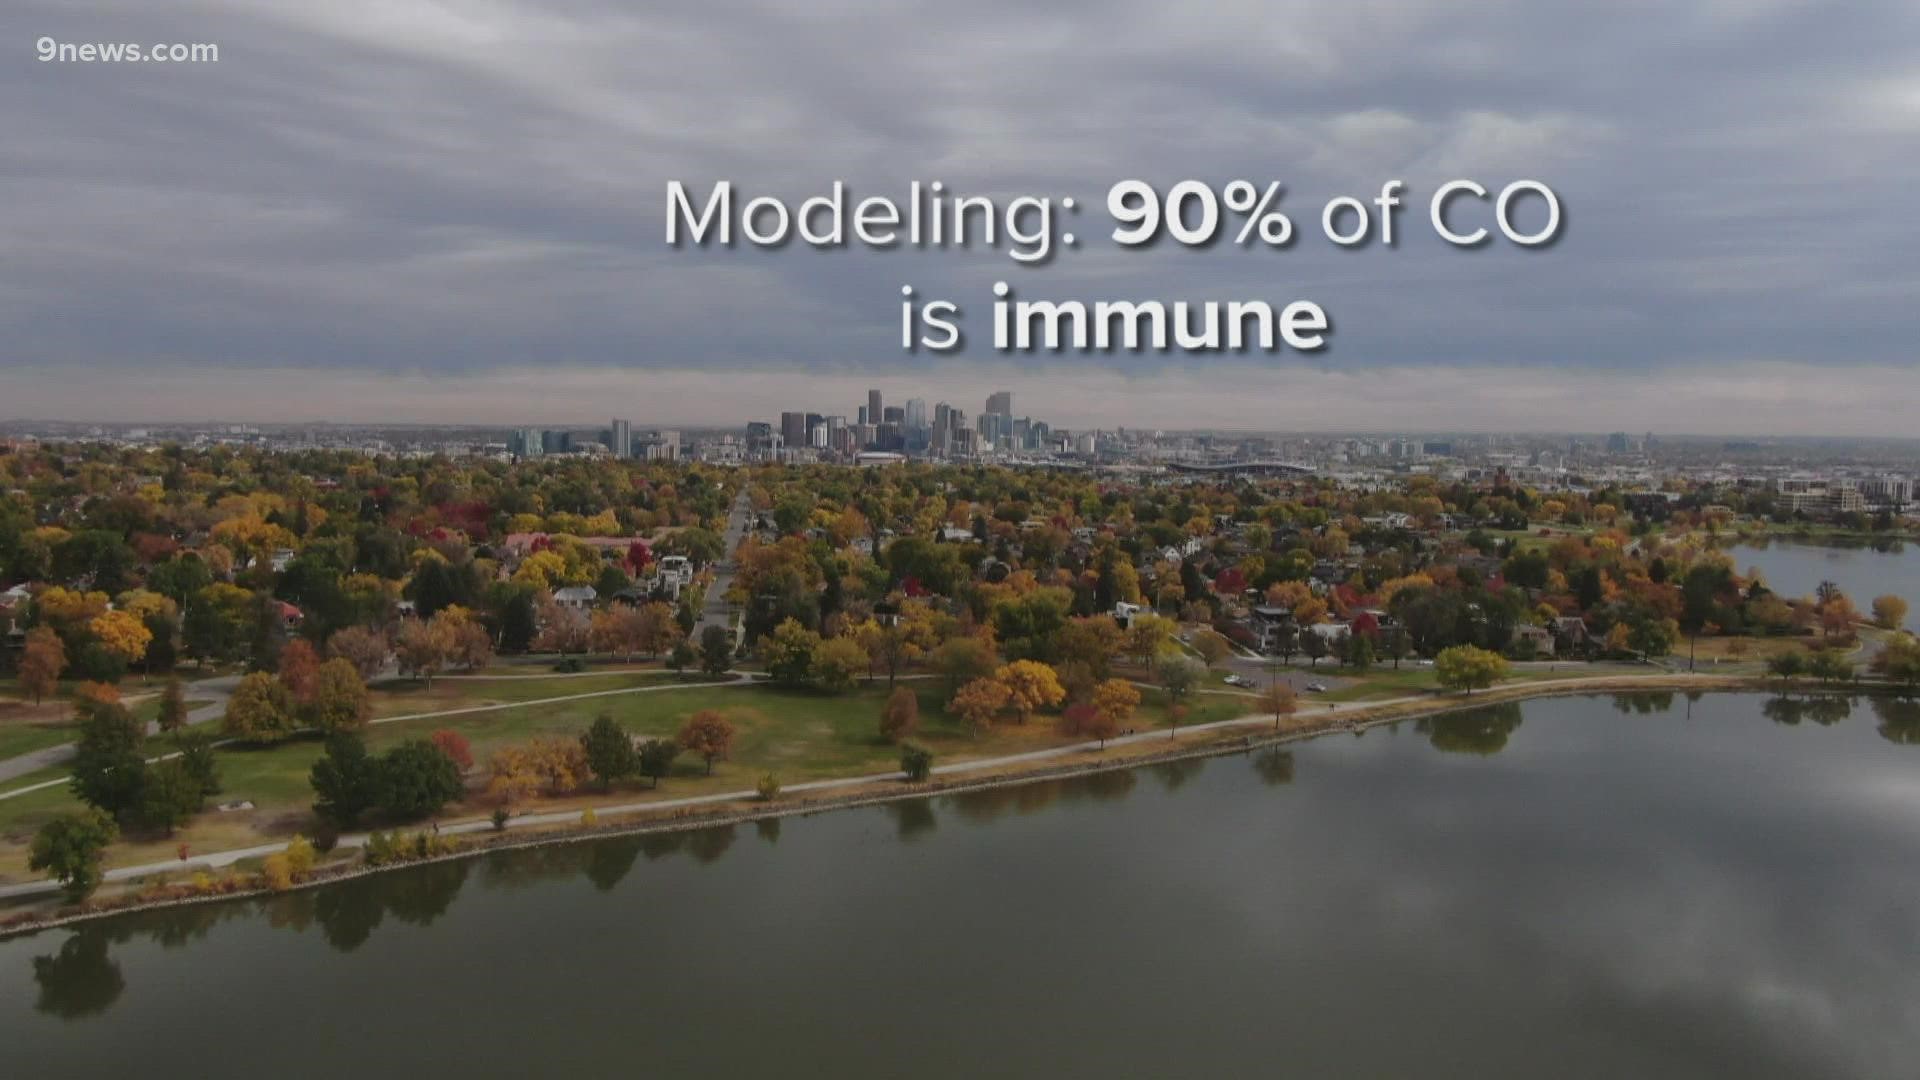 Immunity levels are expected to remain high through early summer, state modeling shows.